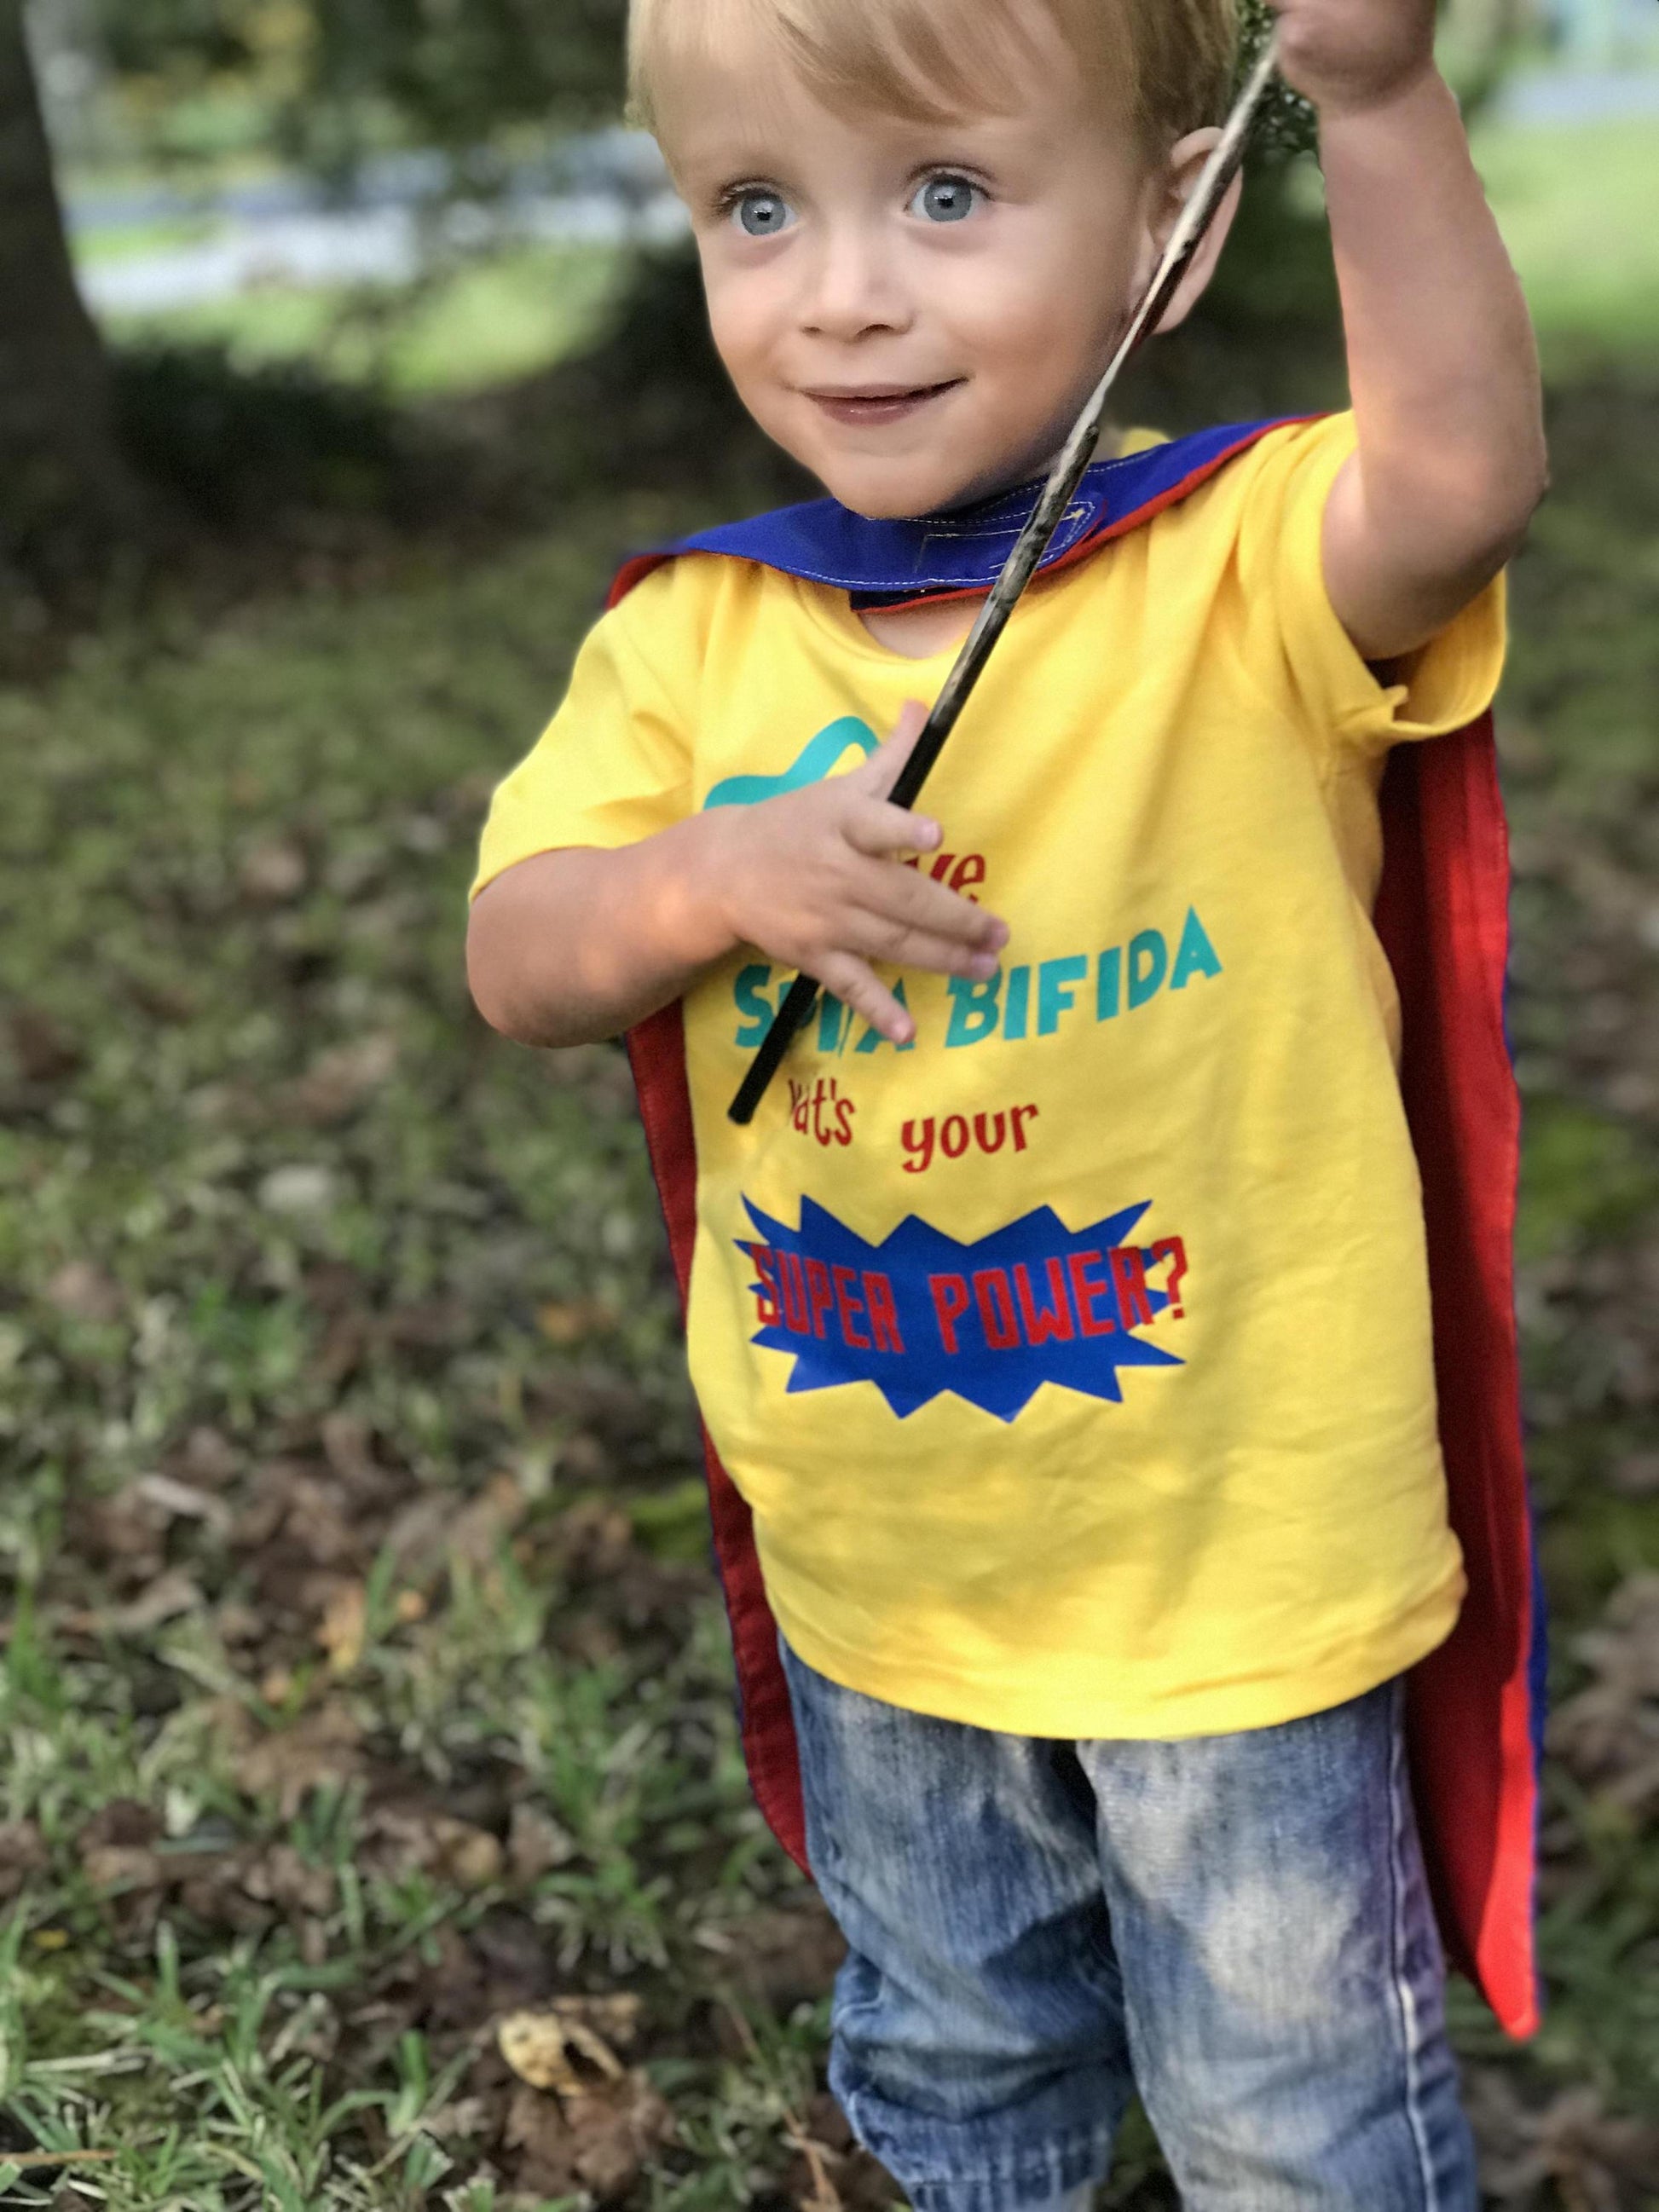 Handcrafted Children's Clothing, Clothing for Children and Parents, Spina Bifida Awareness Shirt - Super Hero inspired Special Needs Awareness shirt, chi-fashionista